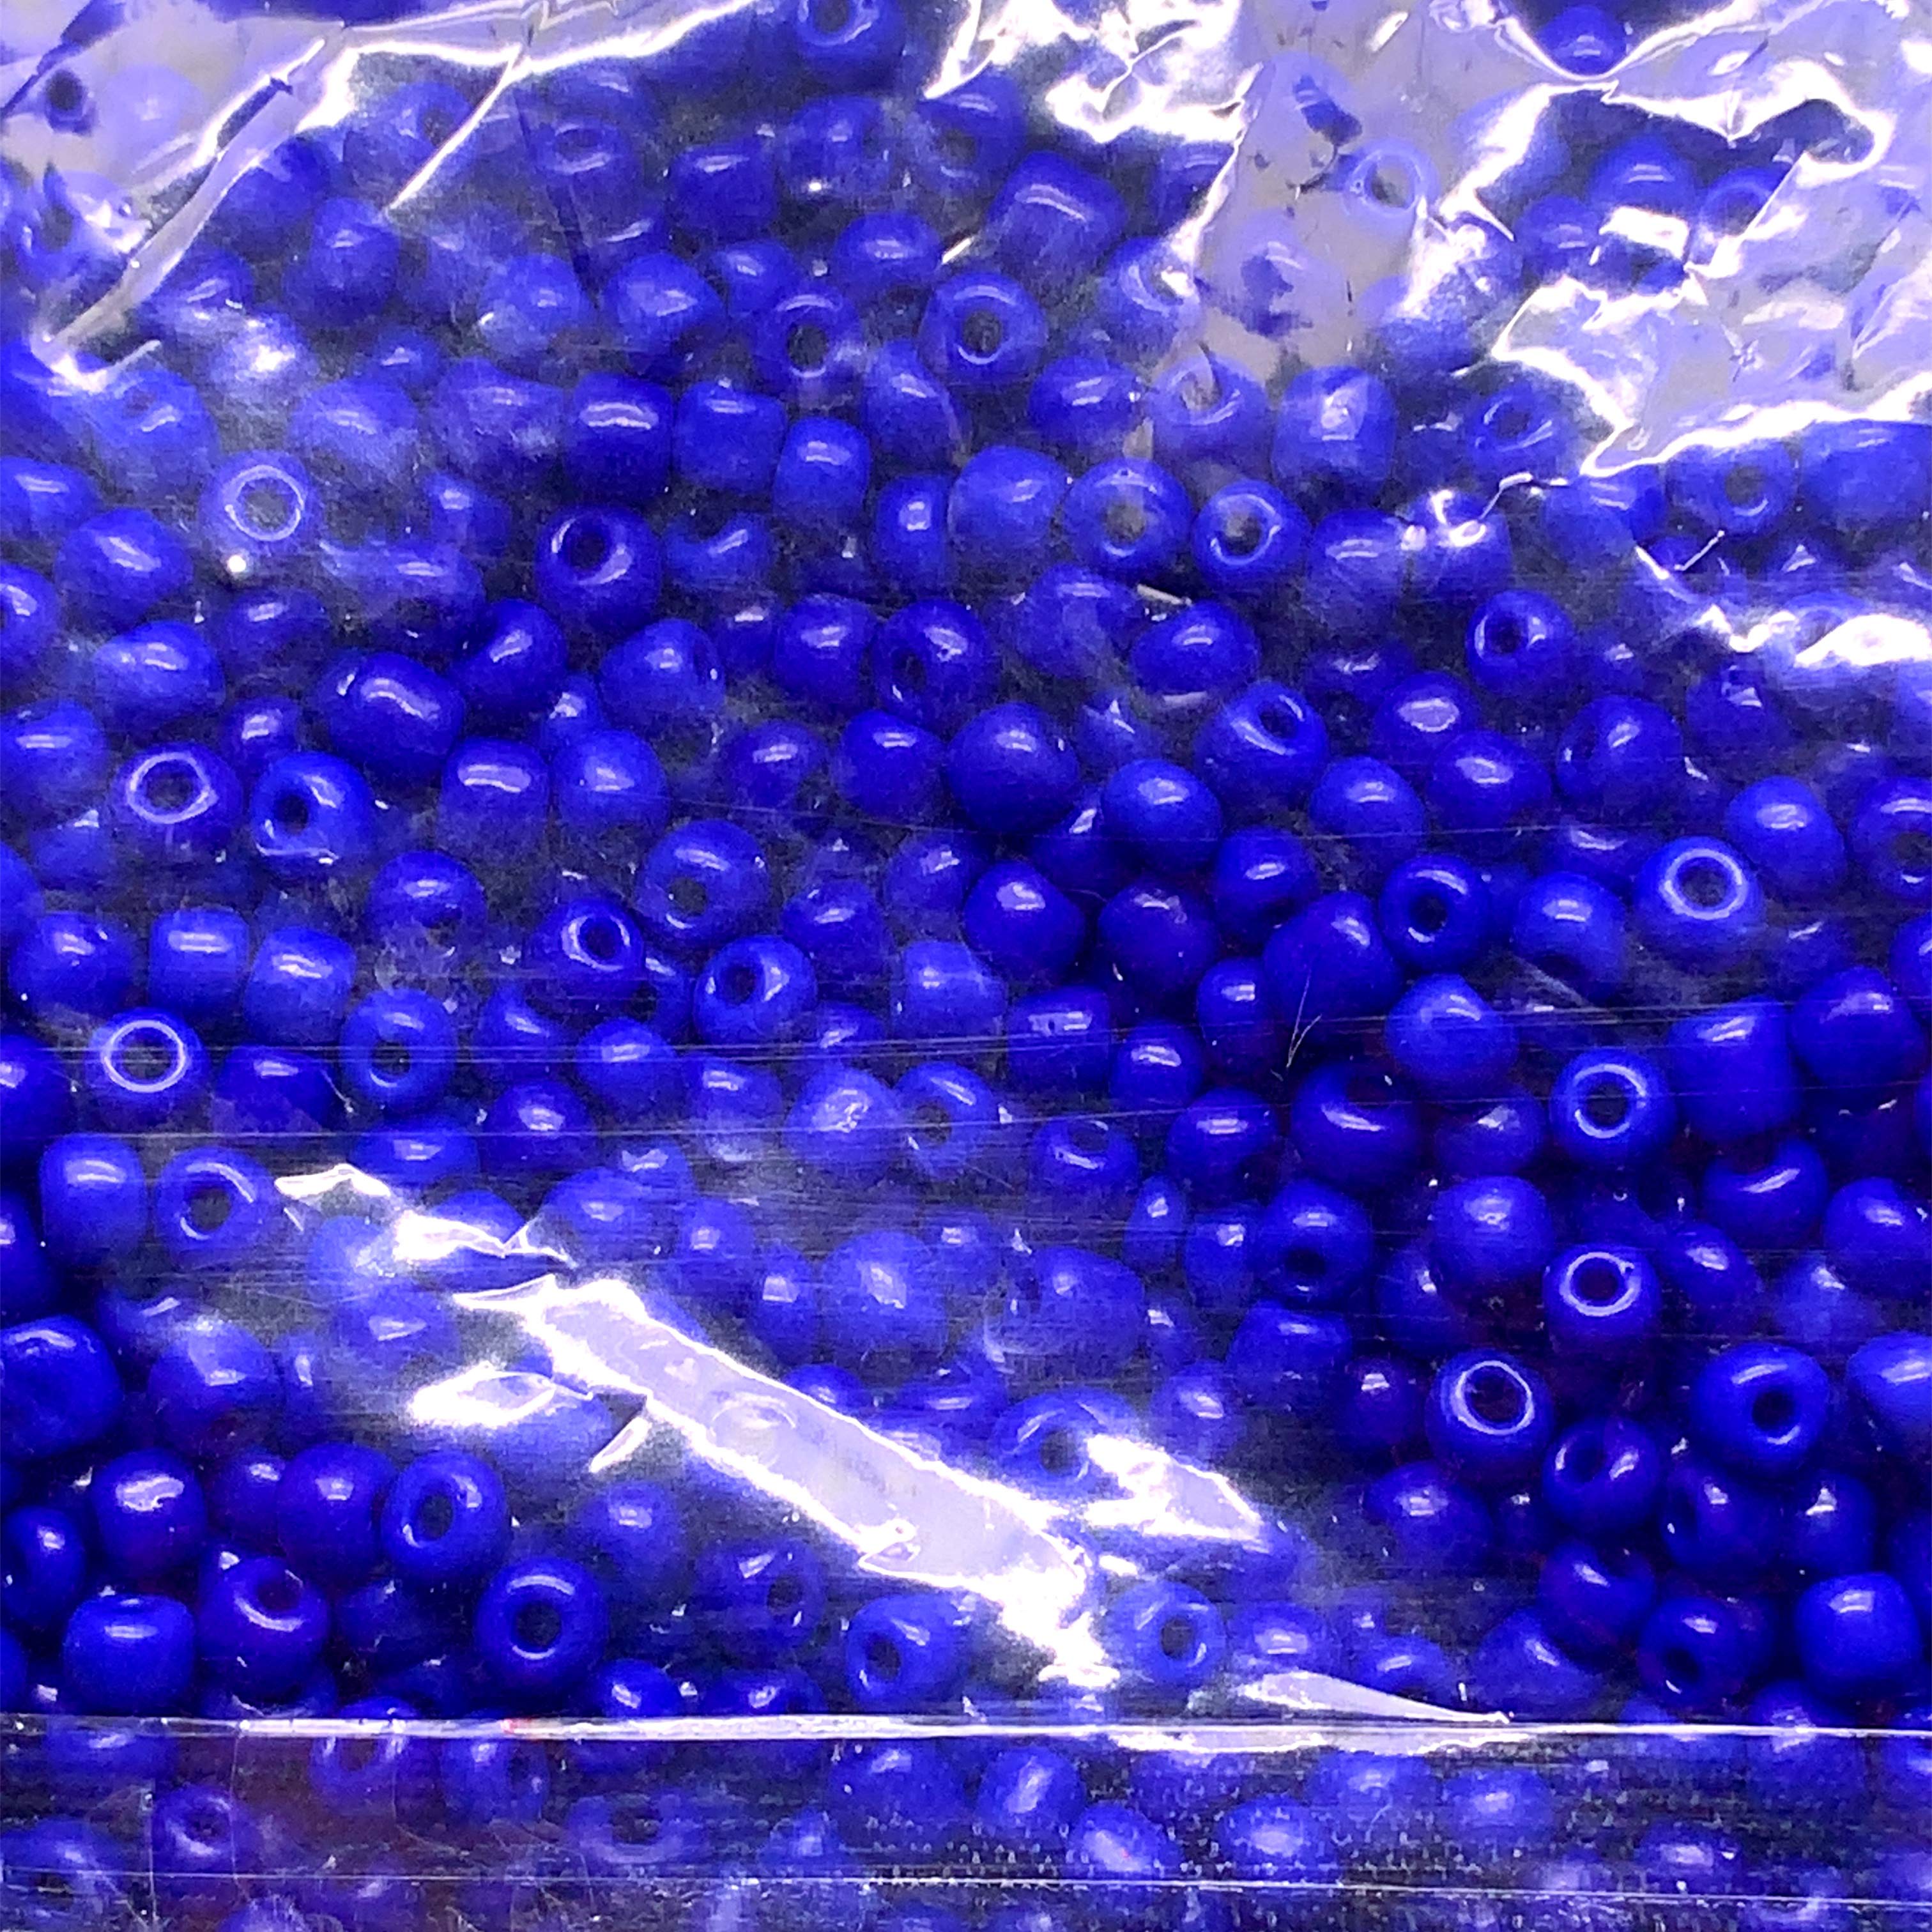 3mm Opaque Blue Glass Seed Beads  - 400g Per Bag